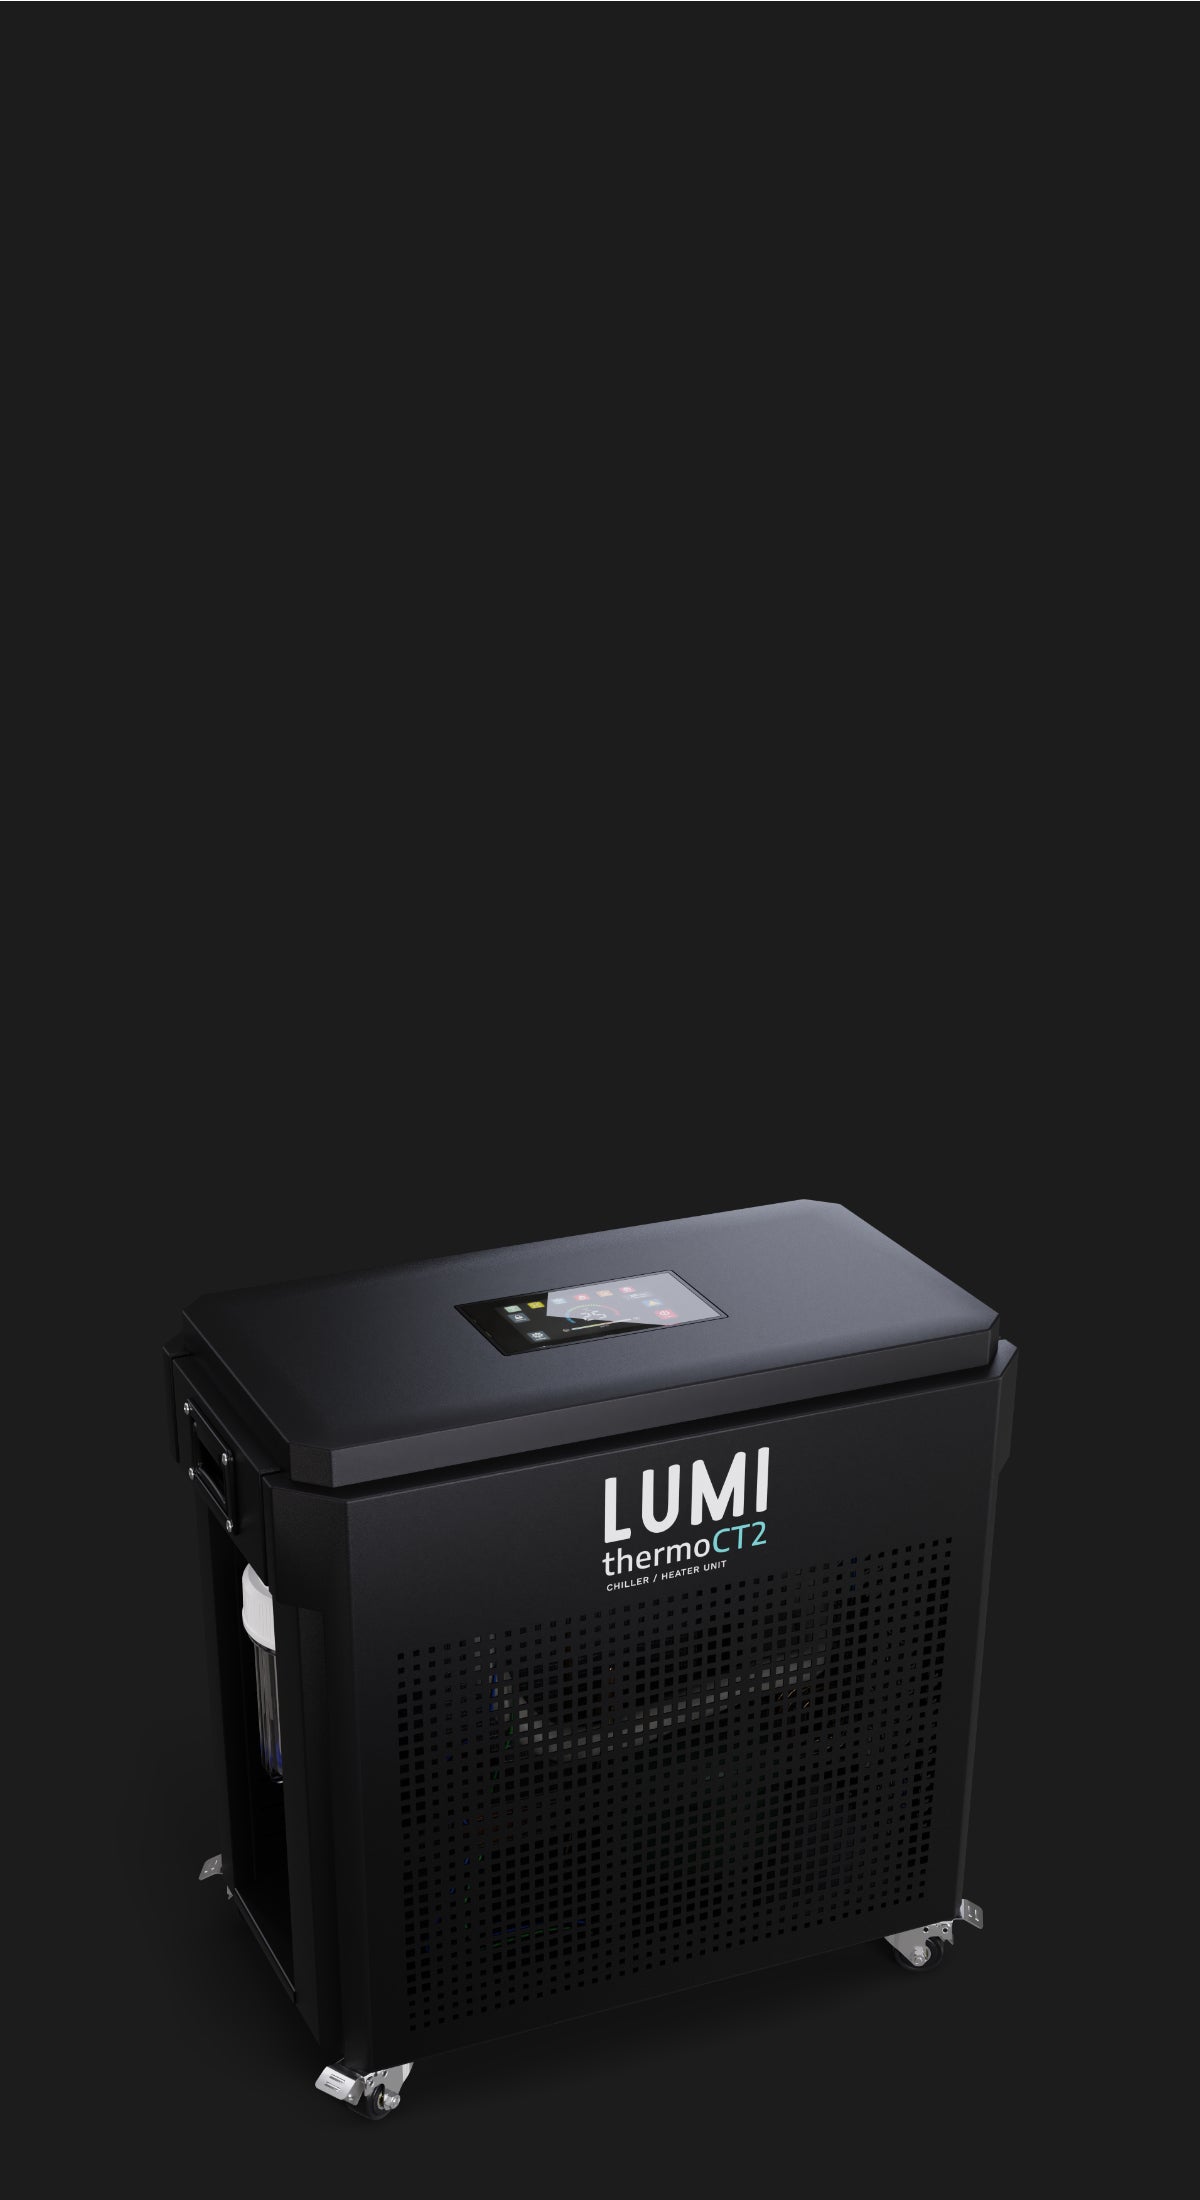 LUMI_Thermo_CT2_banner_images_240216_2.jpg